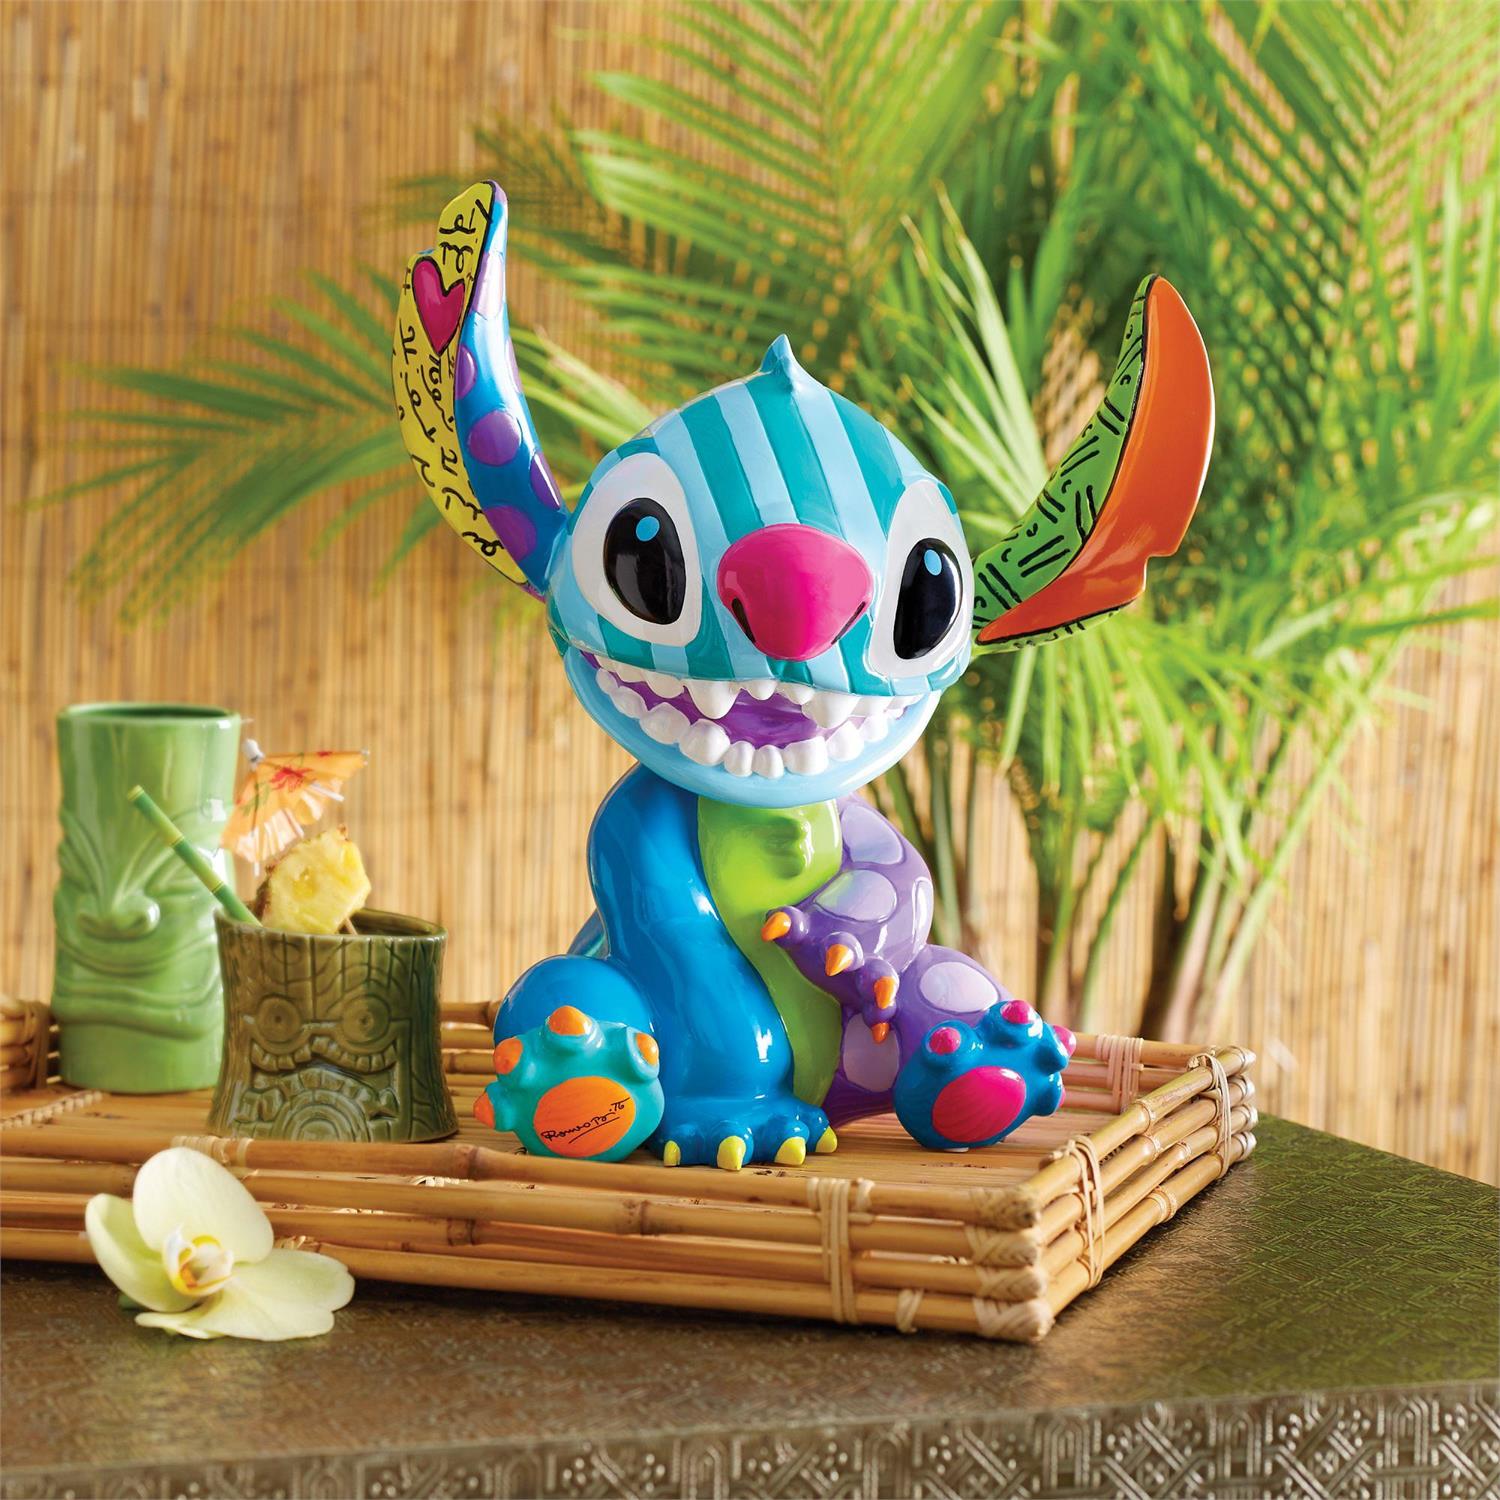 Disney Collectibles Collection - Featuring Stitch